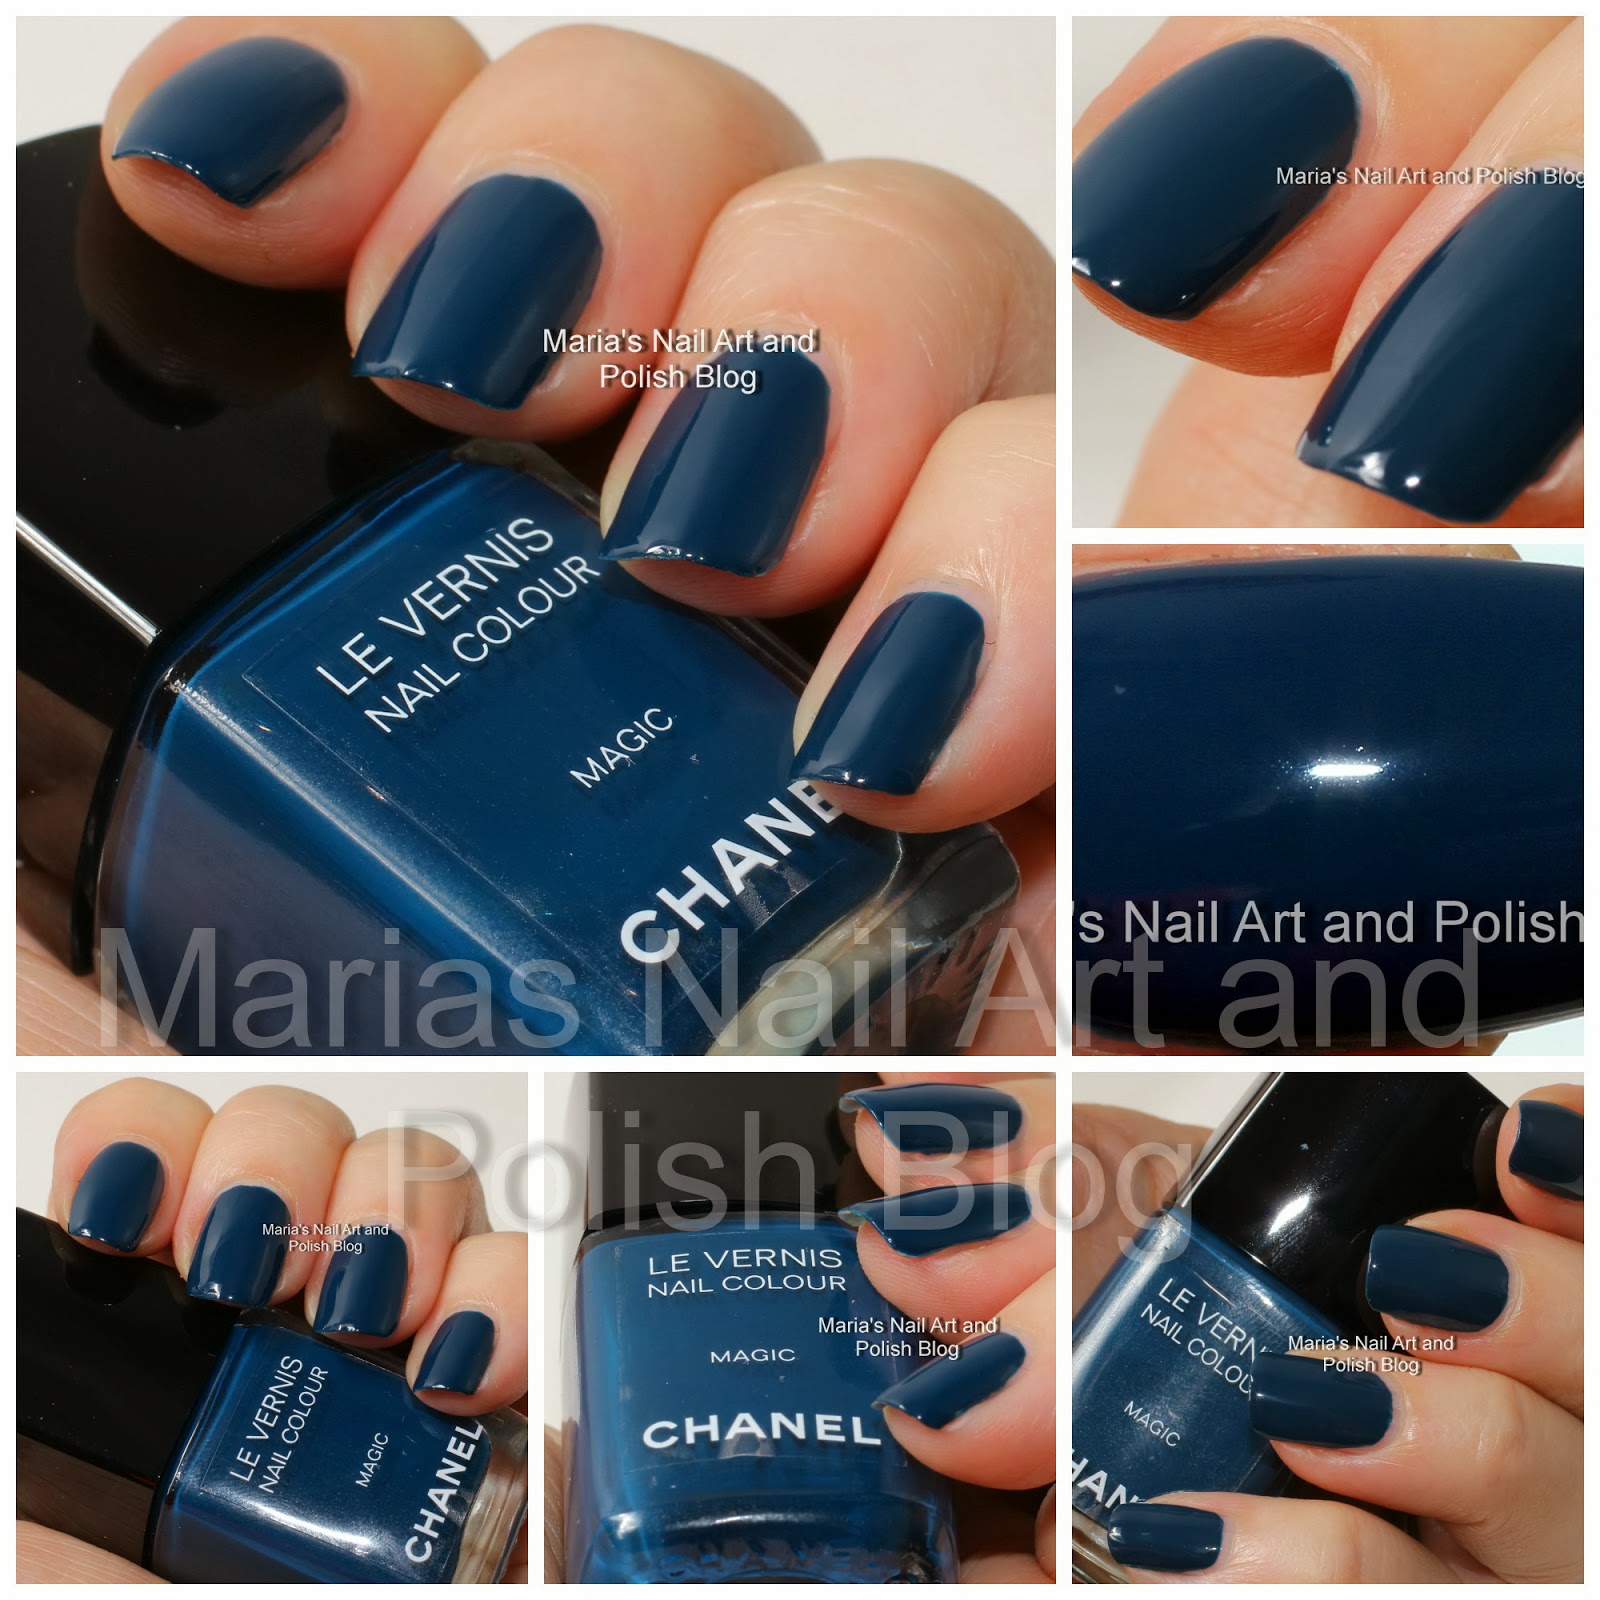 Pointless Cafe: Chanel FNO 2013 Cosmic - Swatches, Review and Comparison